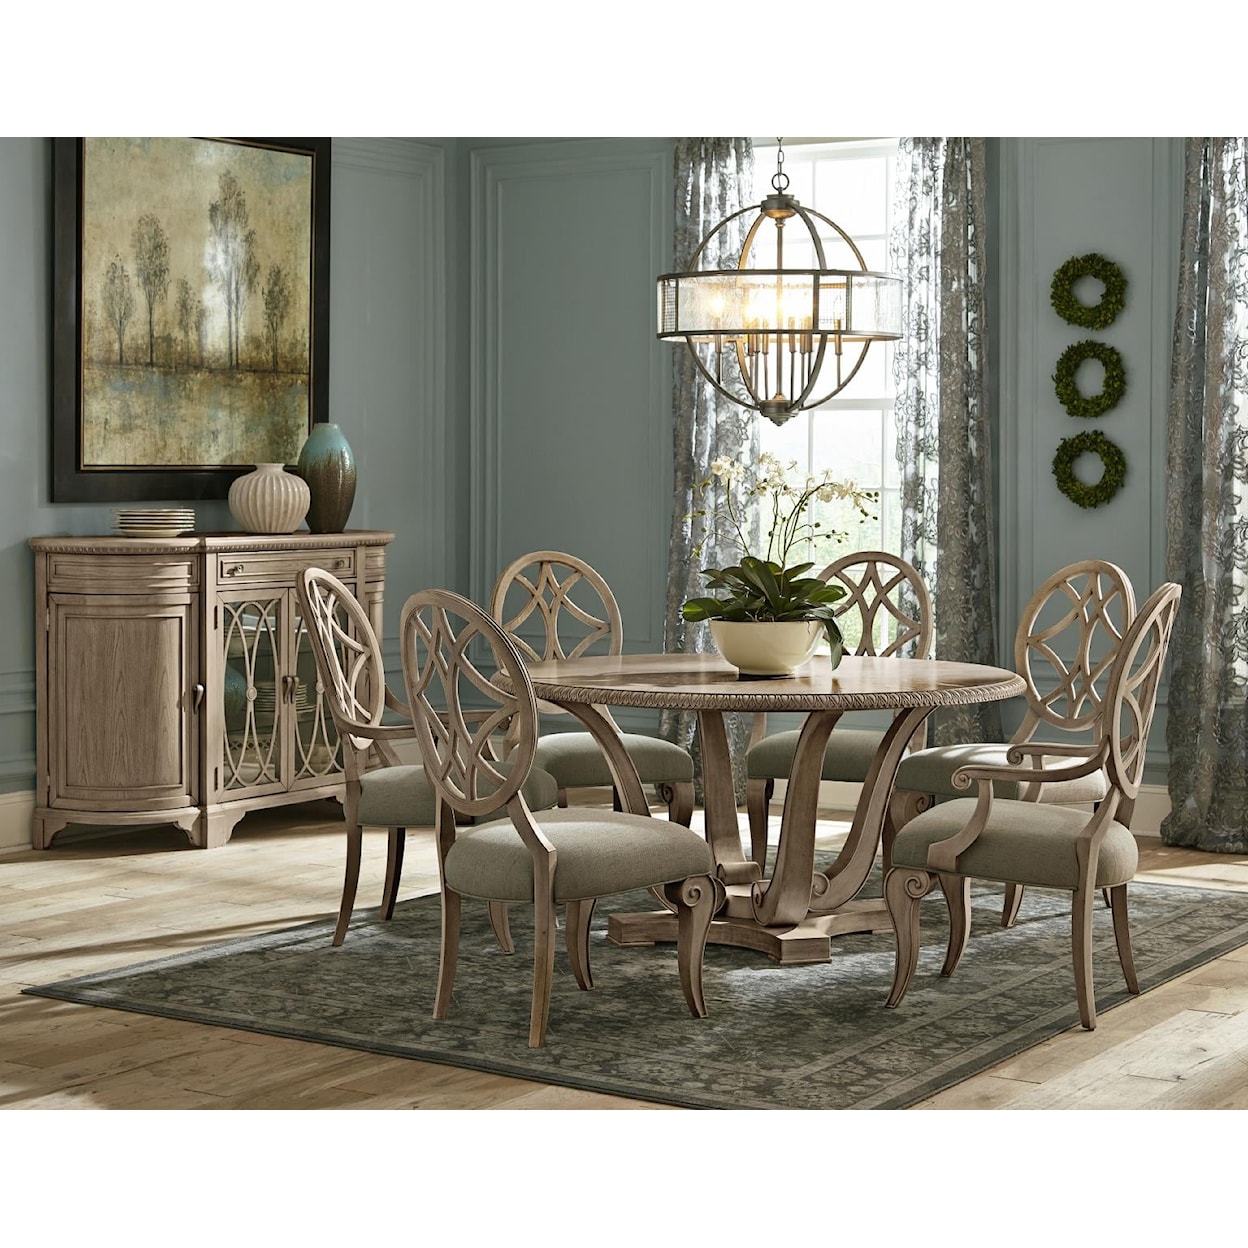 Trisha Yearwood Home Collection by Legacy Classic Jasper County Dining Chair